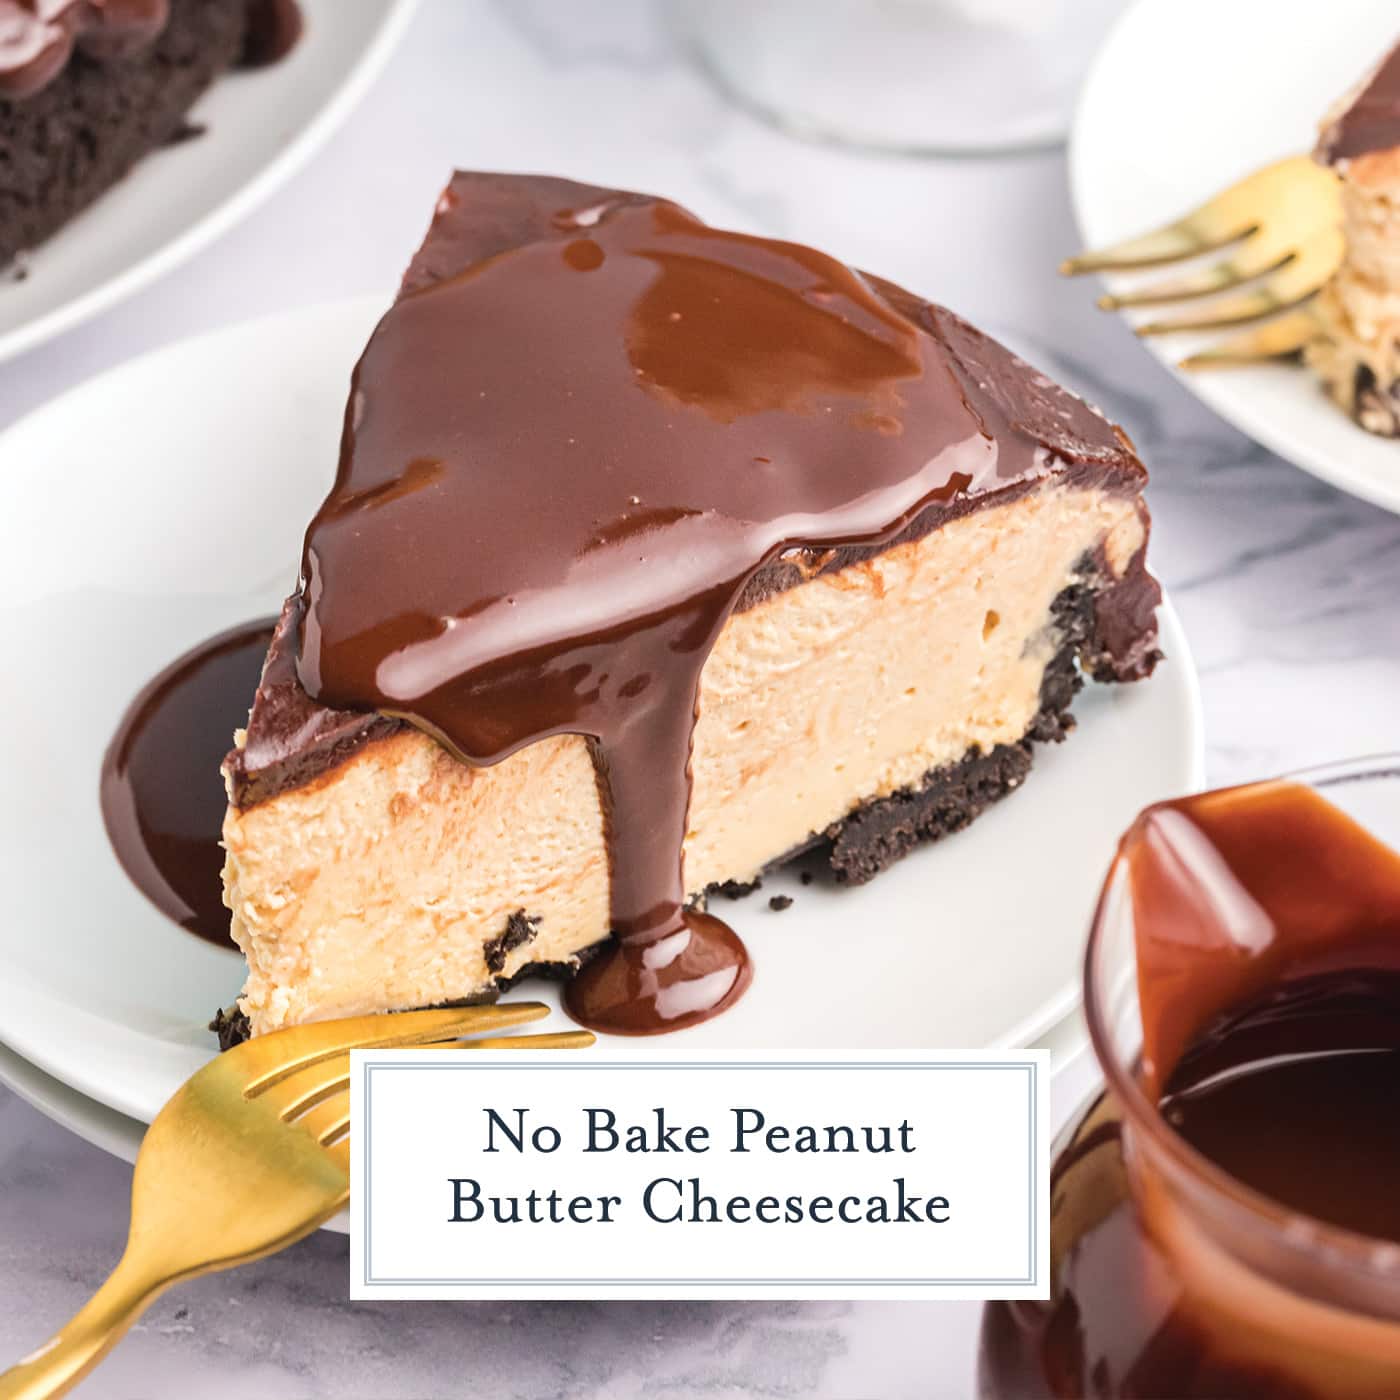 slice of no bake peanut butter cheesecake on plate with text overlay for facebook